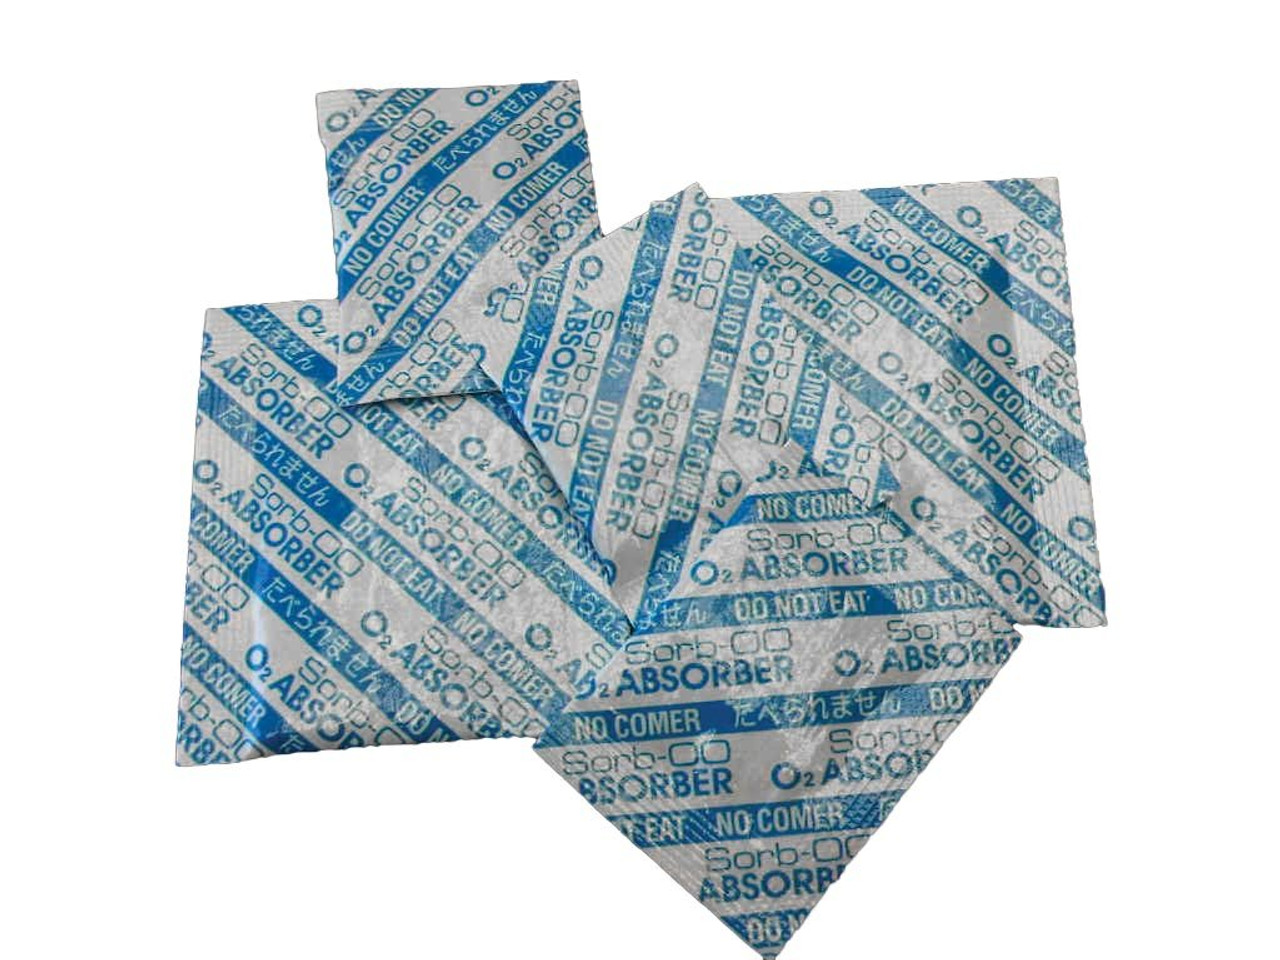 How To Store Unused Oxygen Absorbers